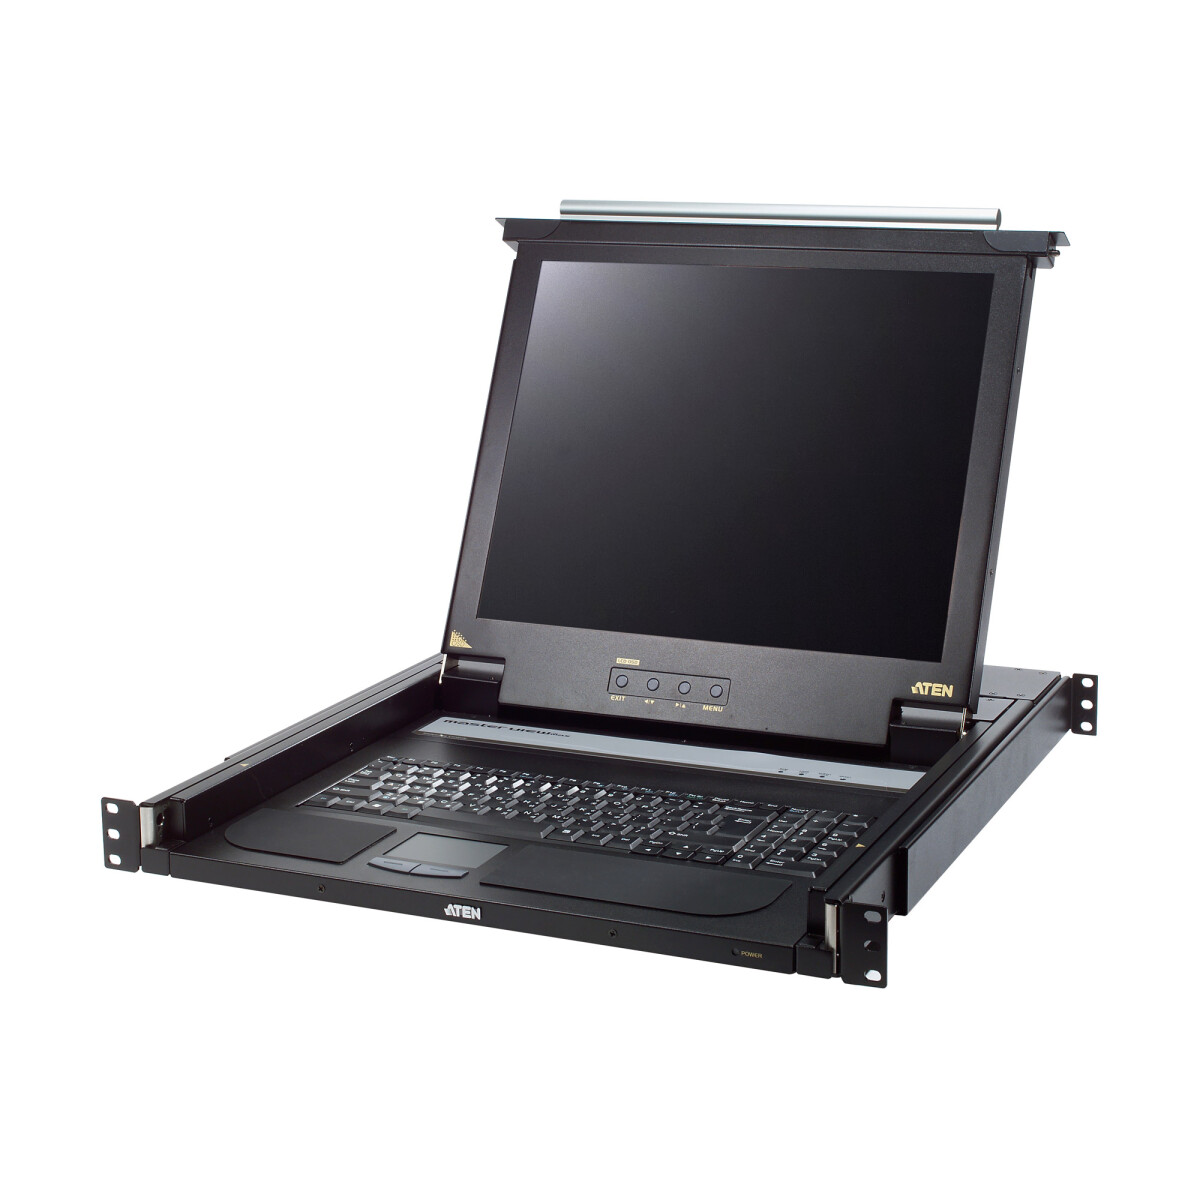 ATEN CL1000N, Slideaway 19" LCD console, with LED...